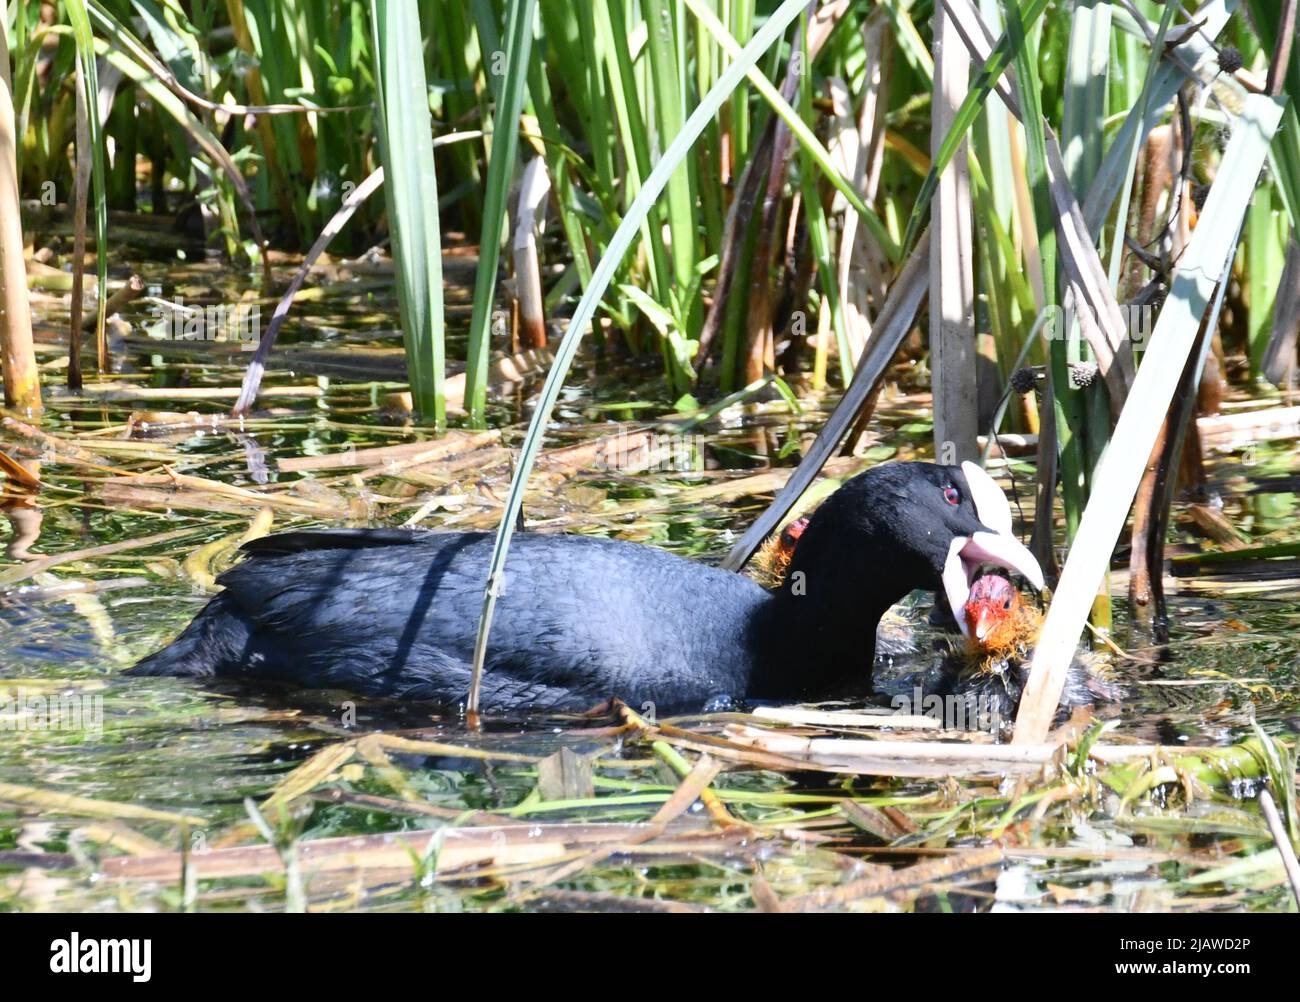 Coots - adult coot with baby chicks at London Wetland Centre, London, England, UK. The adult coot is violently pecking one of its chicks. Stock Photo